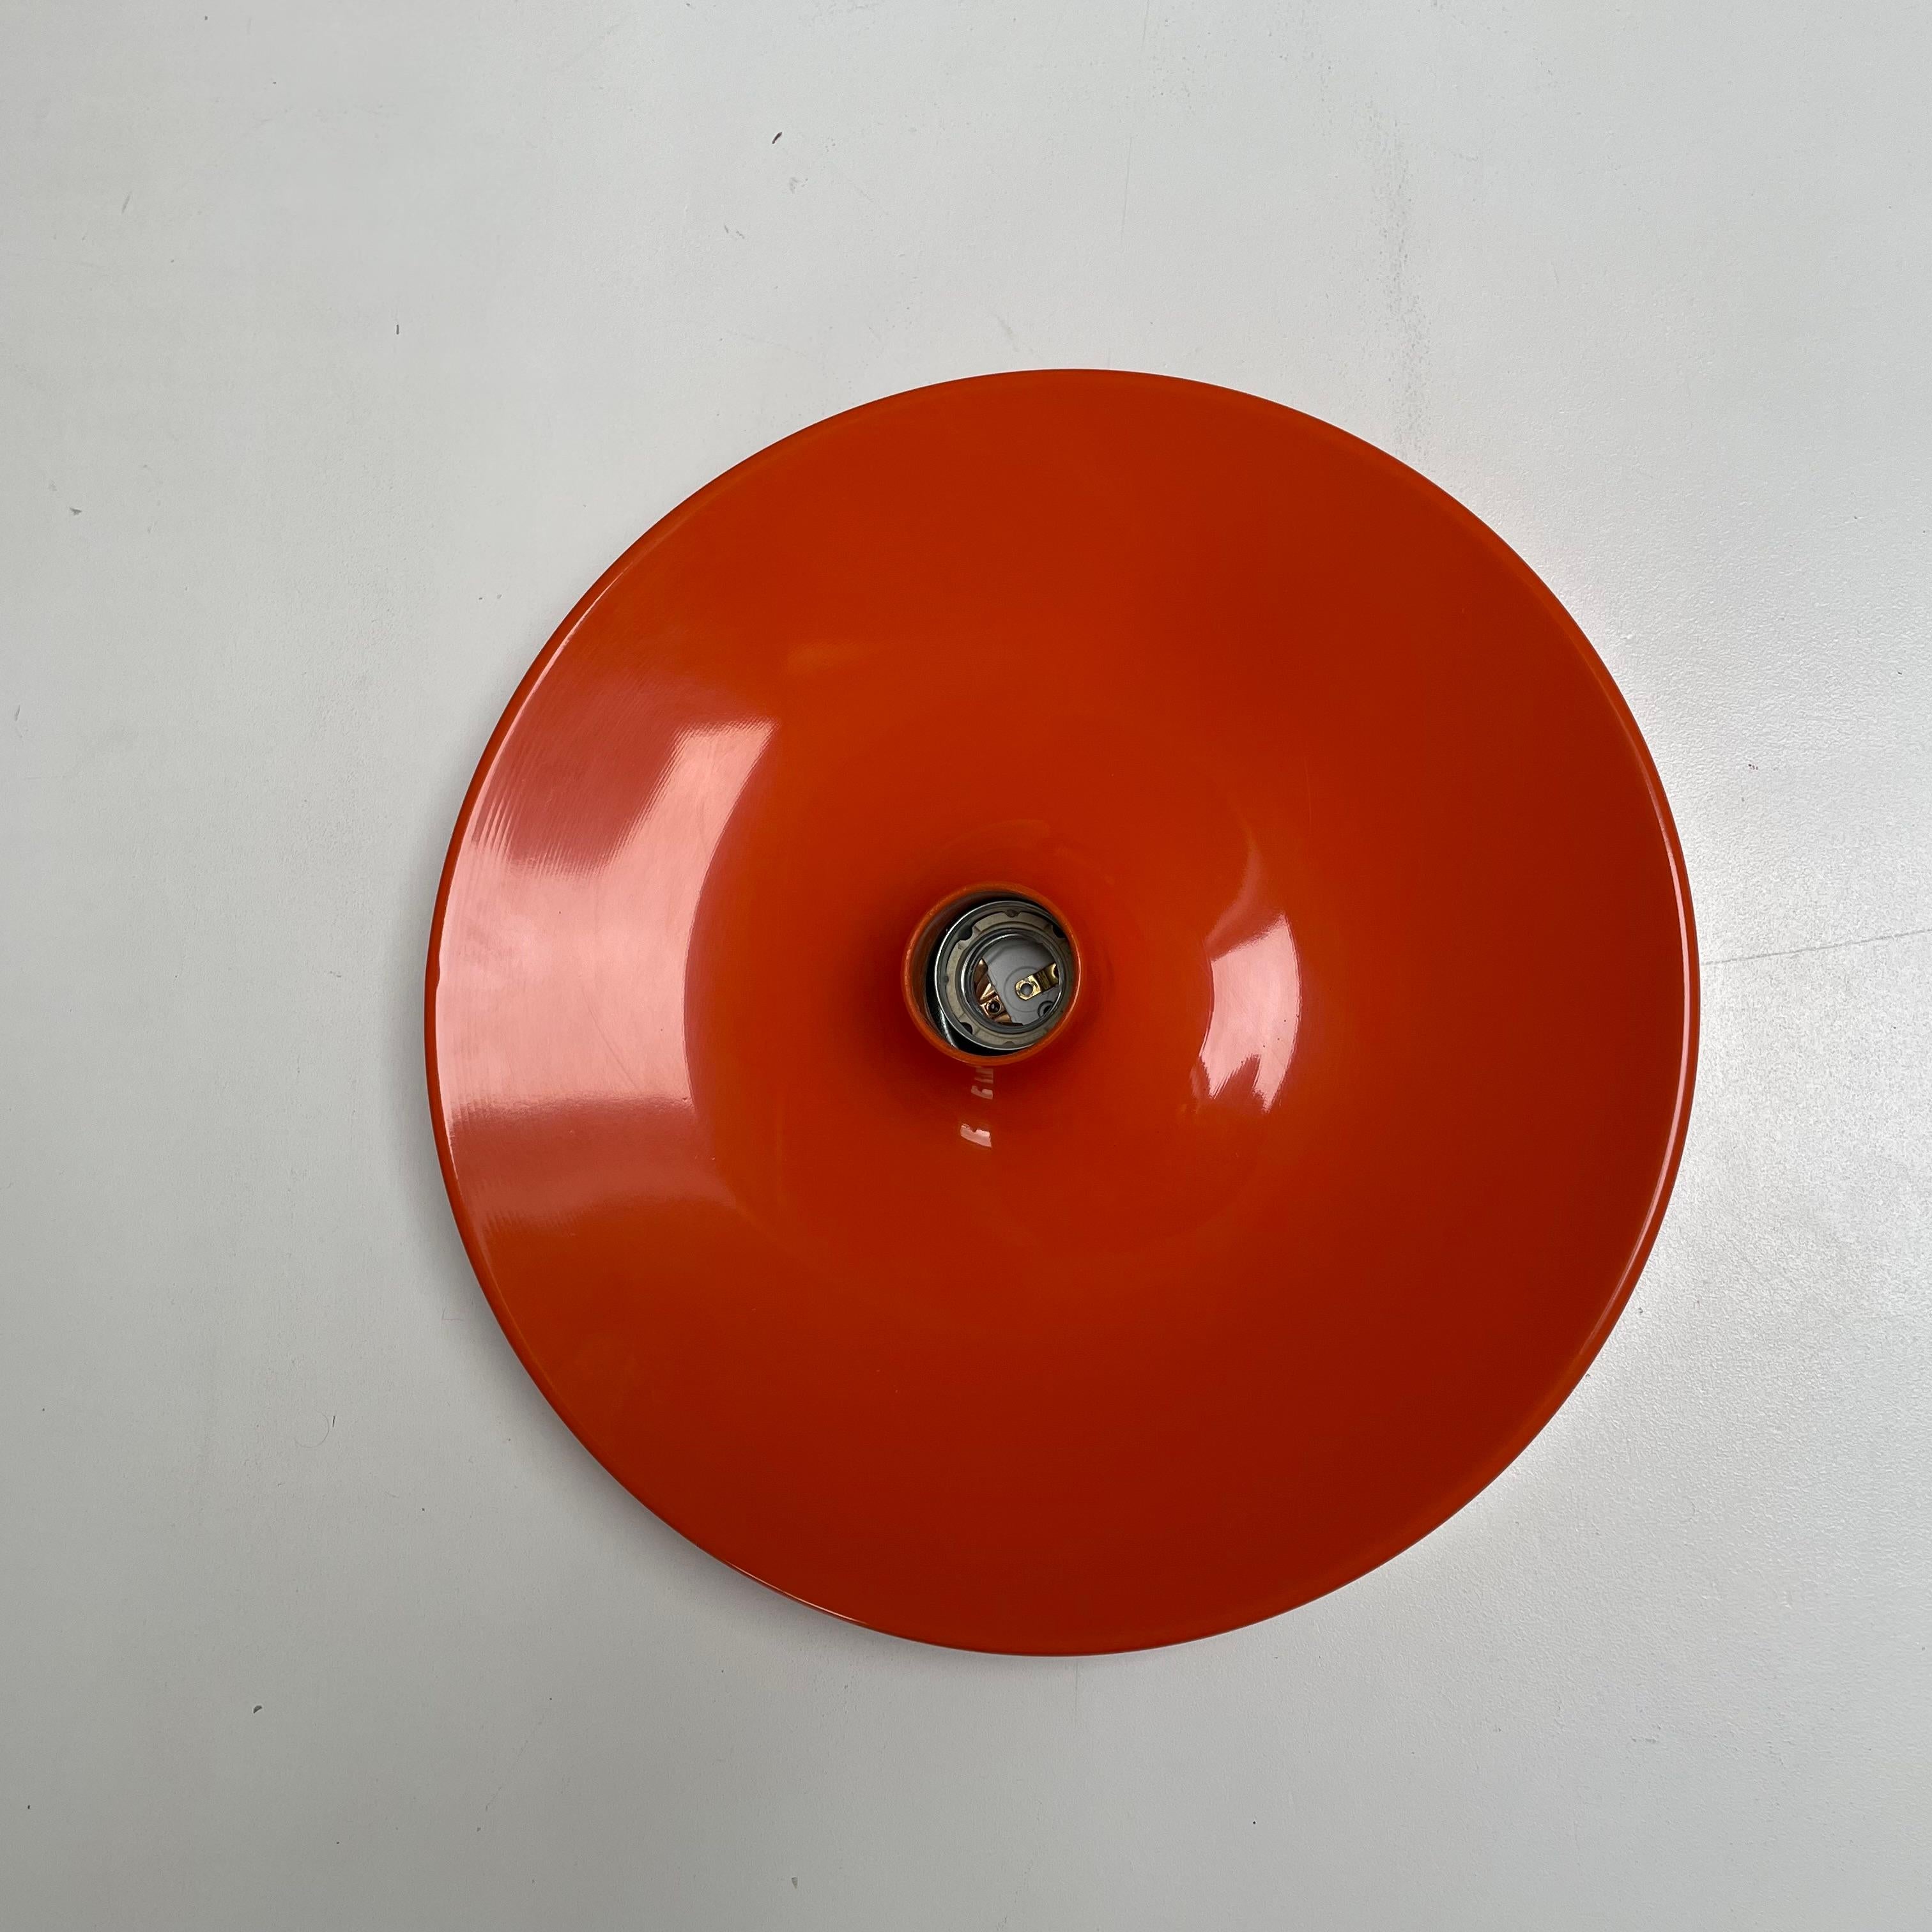 Article:

orange tone wall light


Producer:

Staff lights



Origin:

Germany



Age:

1970s



Description:

Original 1970s modernist German wall light made of solid aluminium metal in orange tone. This super rare wall light was produced in the